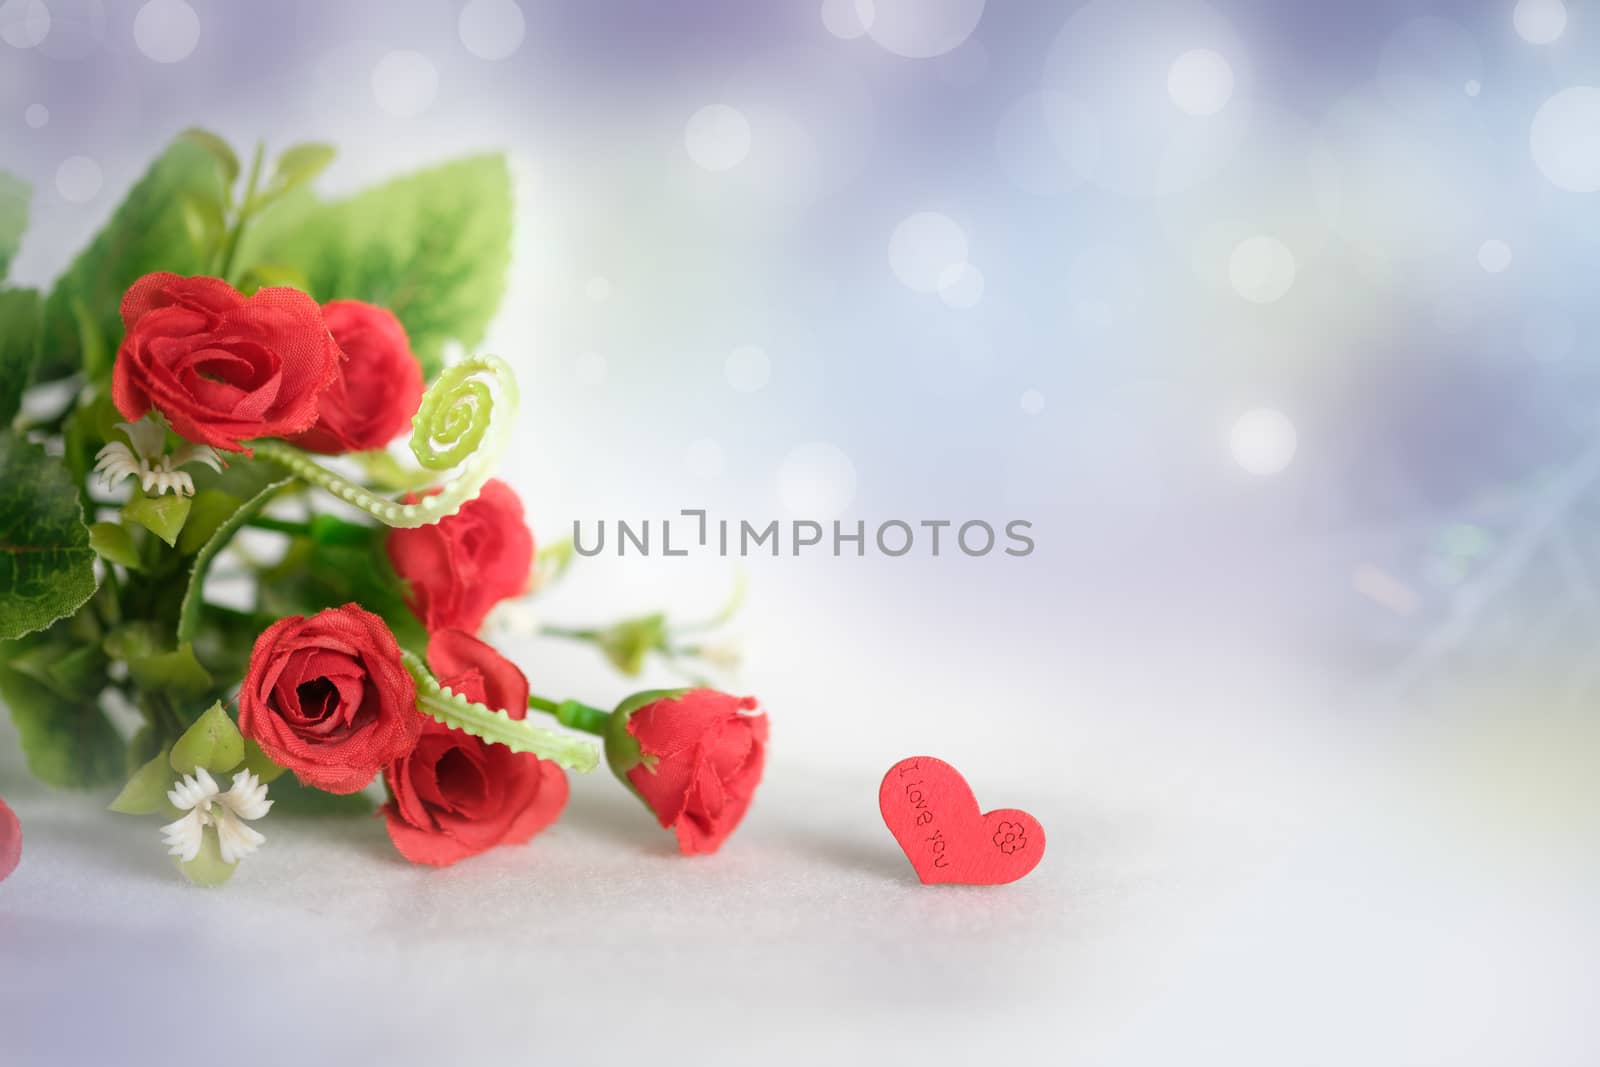 The red rose on abstract bokeh background in love concept for valentines day with romantic moment.